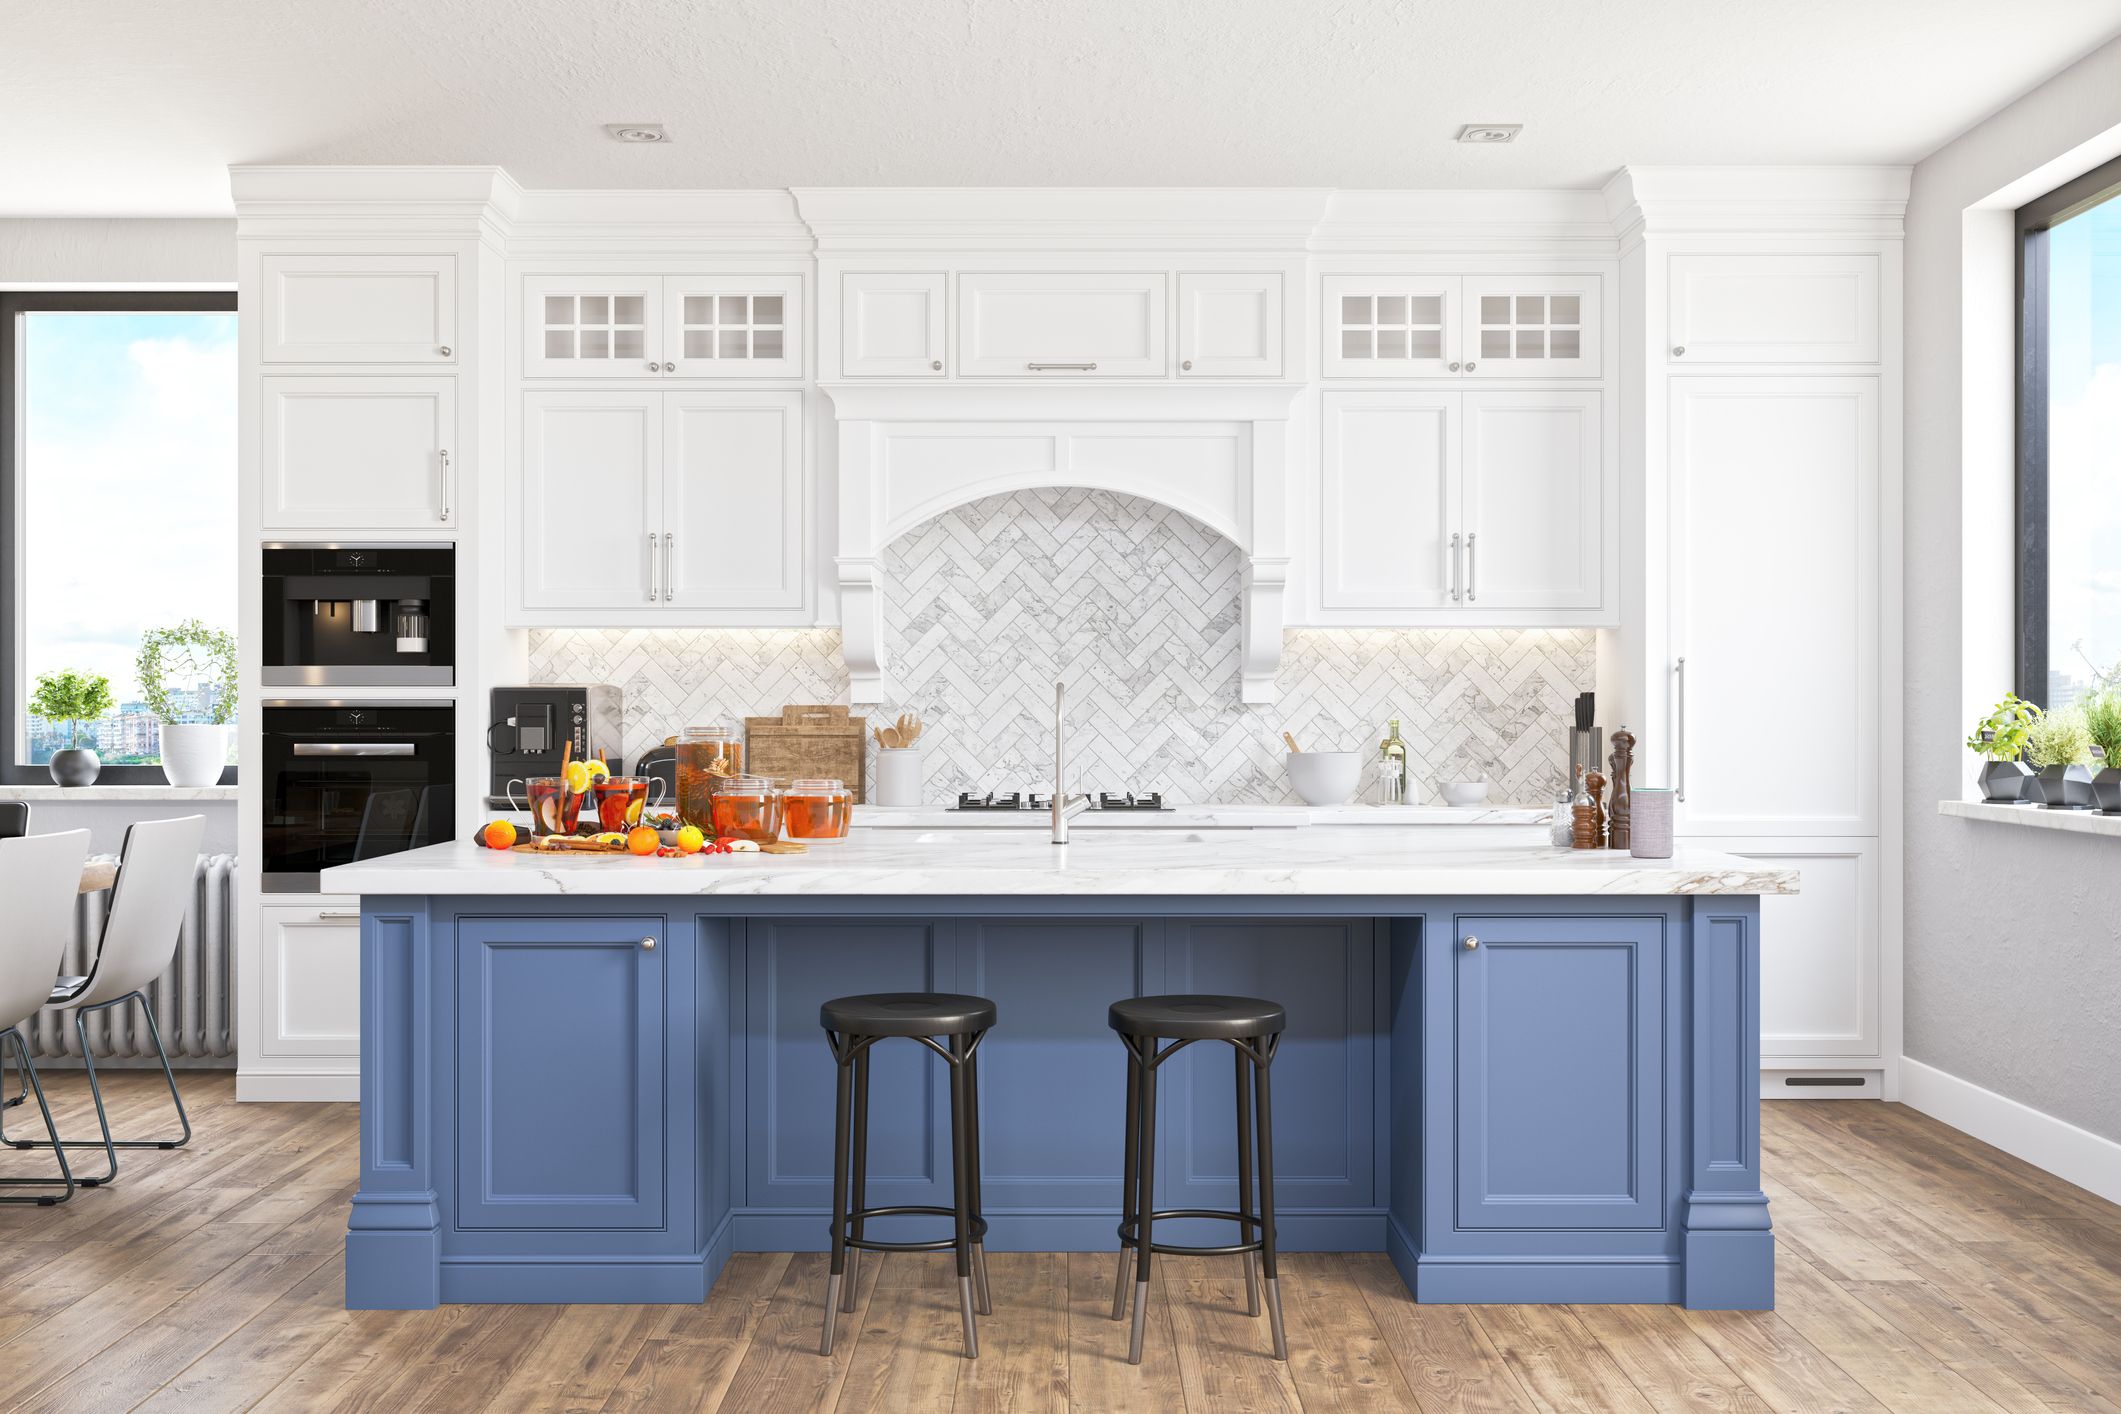 7 Fun Ways to Add Color to Your Kitchen